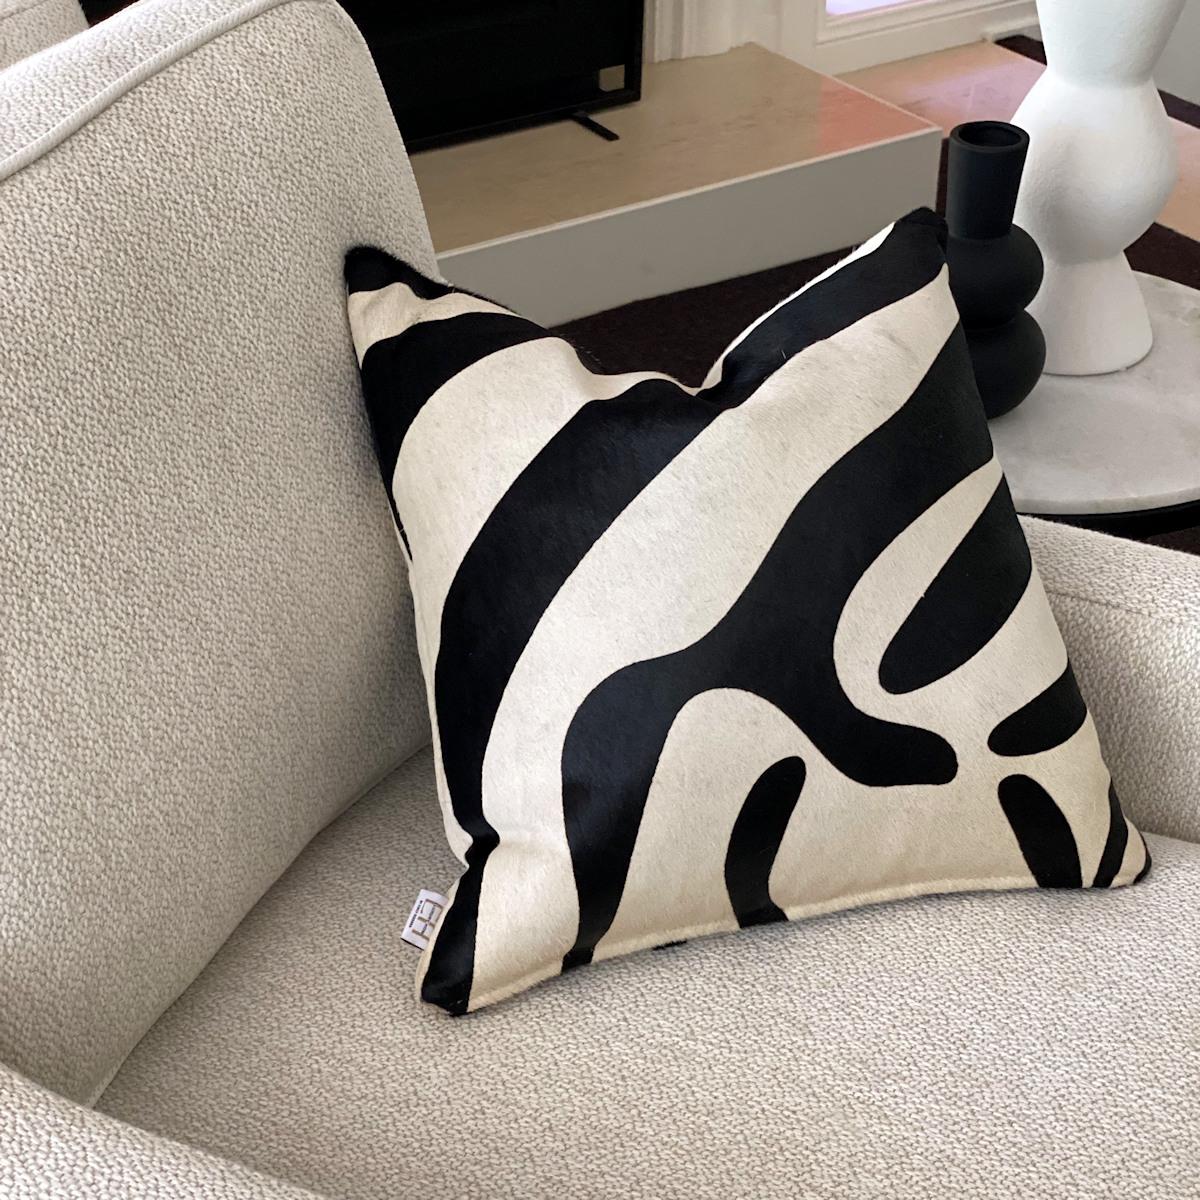 Add exotic flair to your interiors with this zebra print pillow.  Australian Designer and Artisan, Emily Barbara personally pre-selects and pre-patterns the zebra print cowhide skins to capture the striking pattern and color tones prior to creating